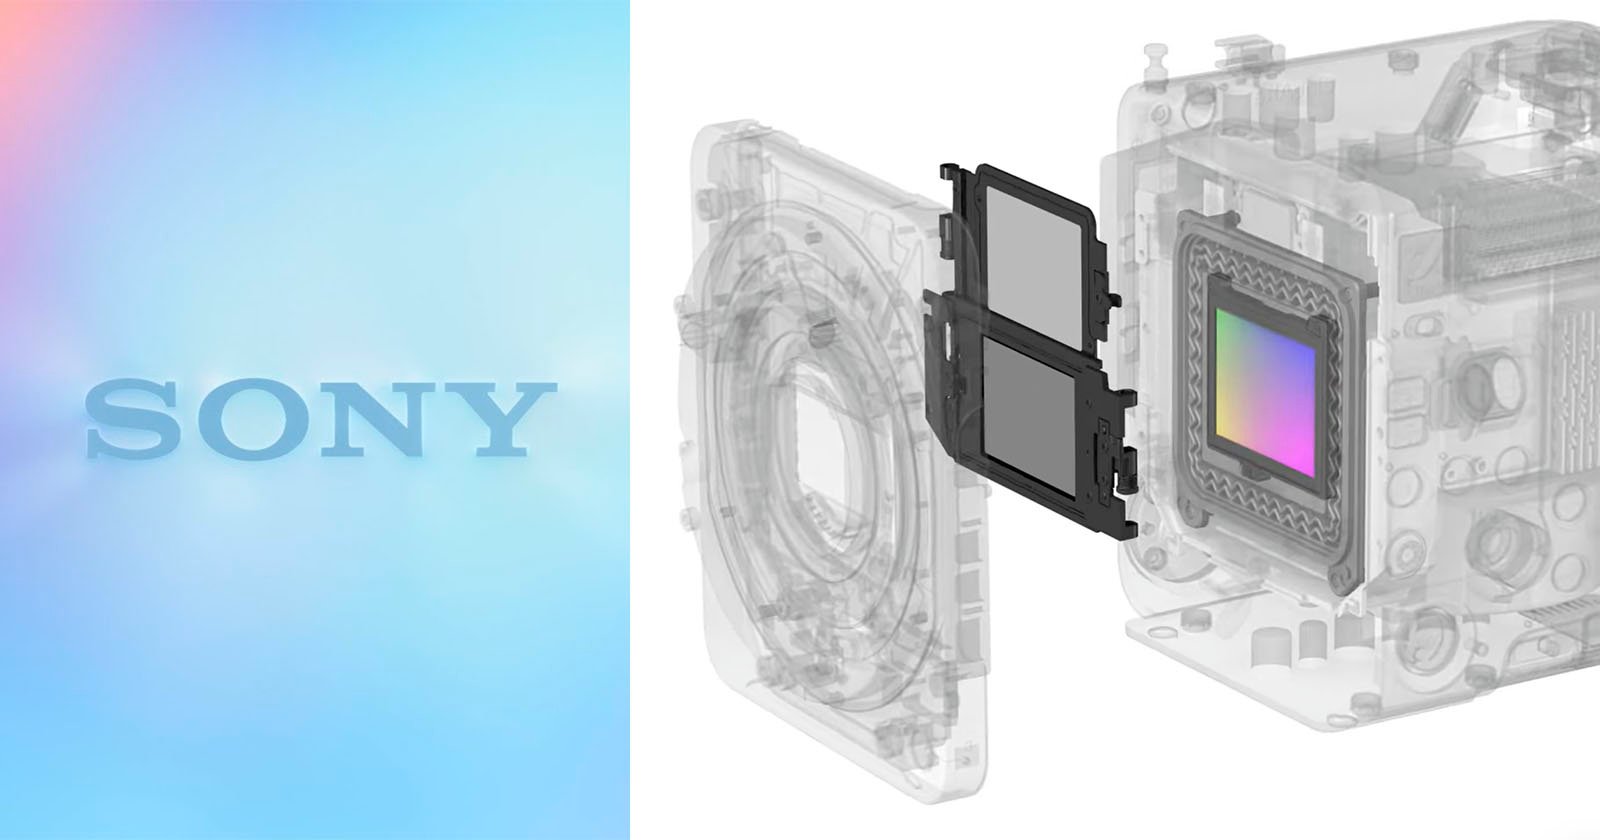 How Sonys Clever Electronic Variable ND System Works and Why it Matters